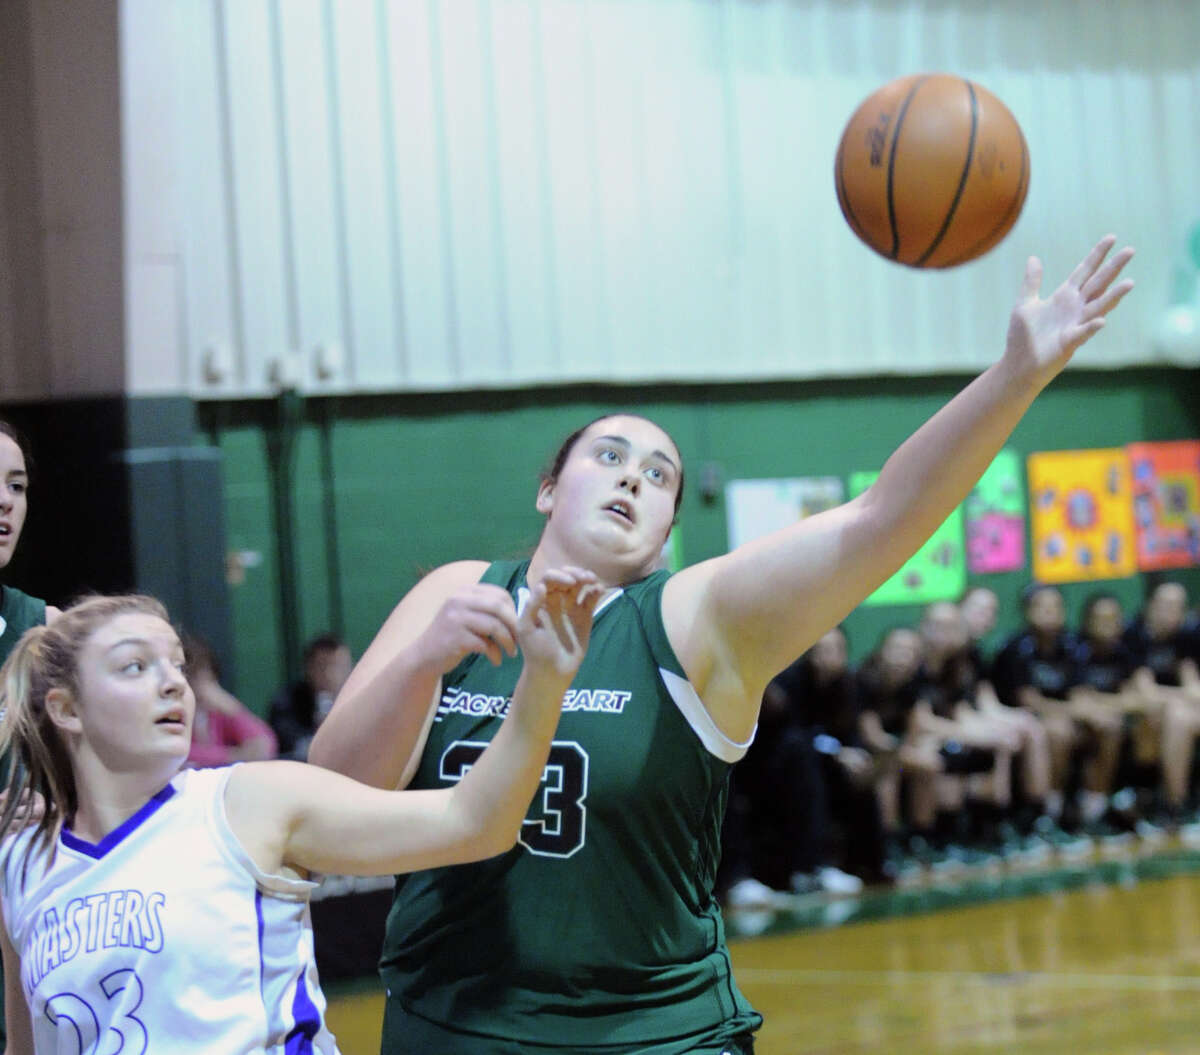 At right, Emily O'Sullivan # 33 of Convent goes for the ball along with Gianna Masini # 23 of Masters during the girls high school basketball game between Masters and Convent of the Sacred Heart at the Convent in Greenwich, Thursday, Feb. 14, 2013.